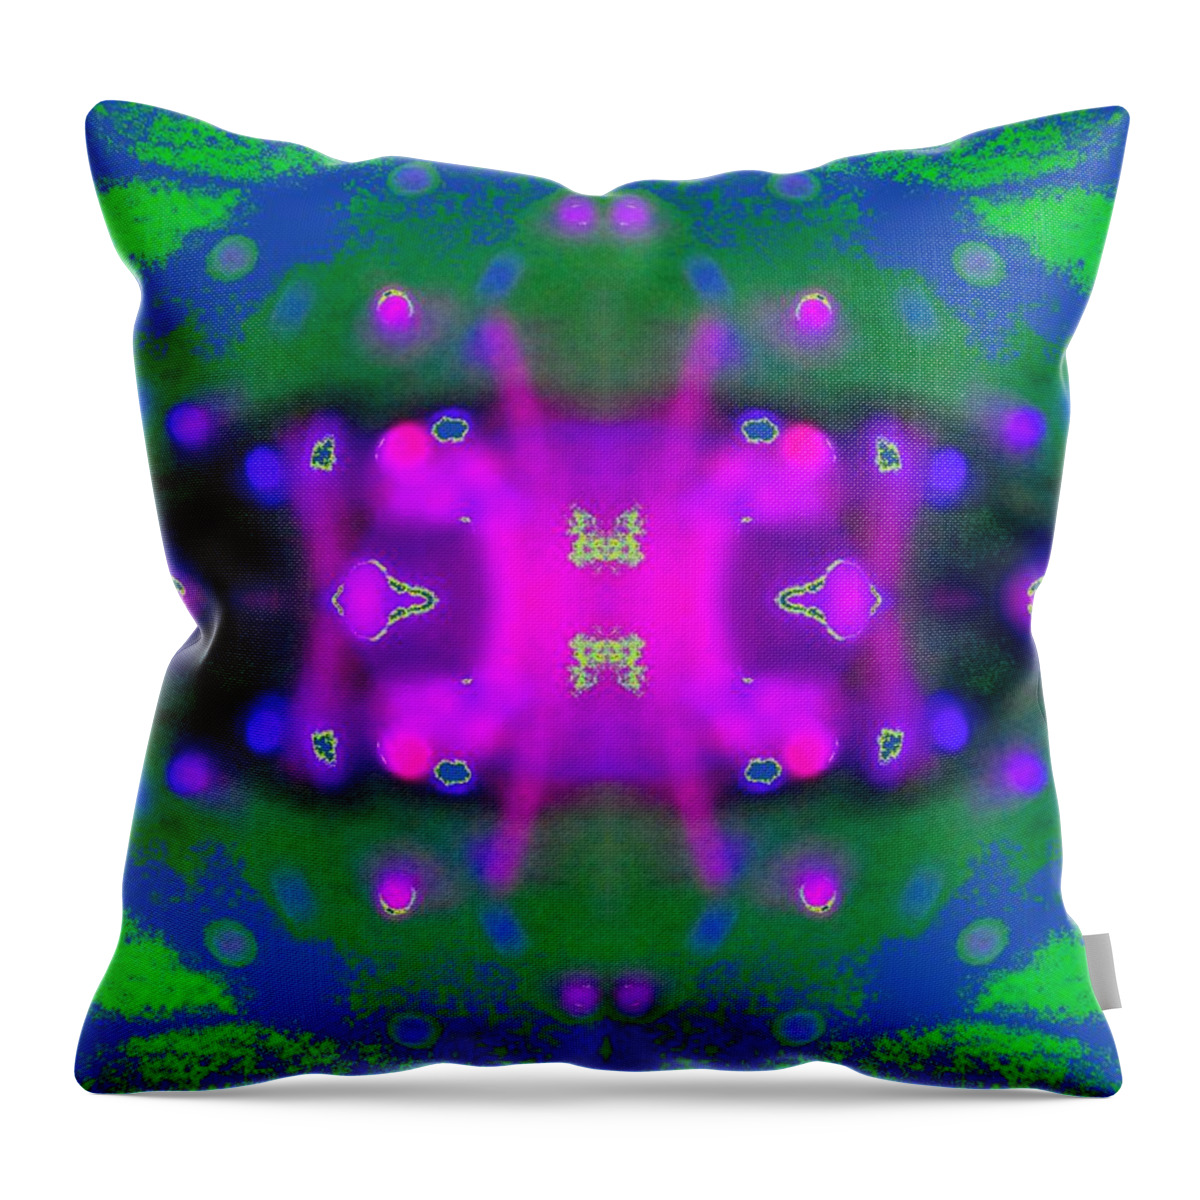 Abstract Throw Pillow featuring the digital art Abstract Expressionaryish 23 by T Oliver